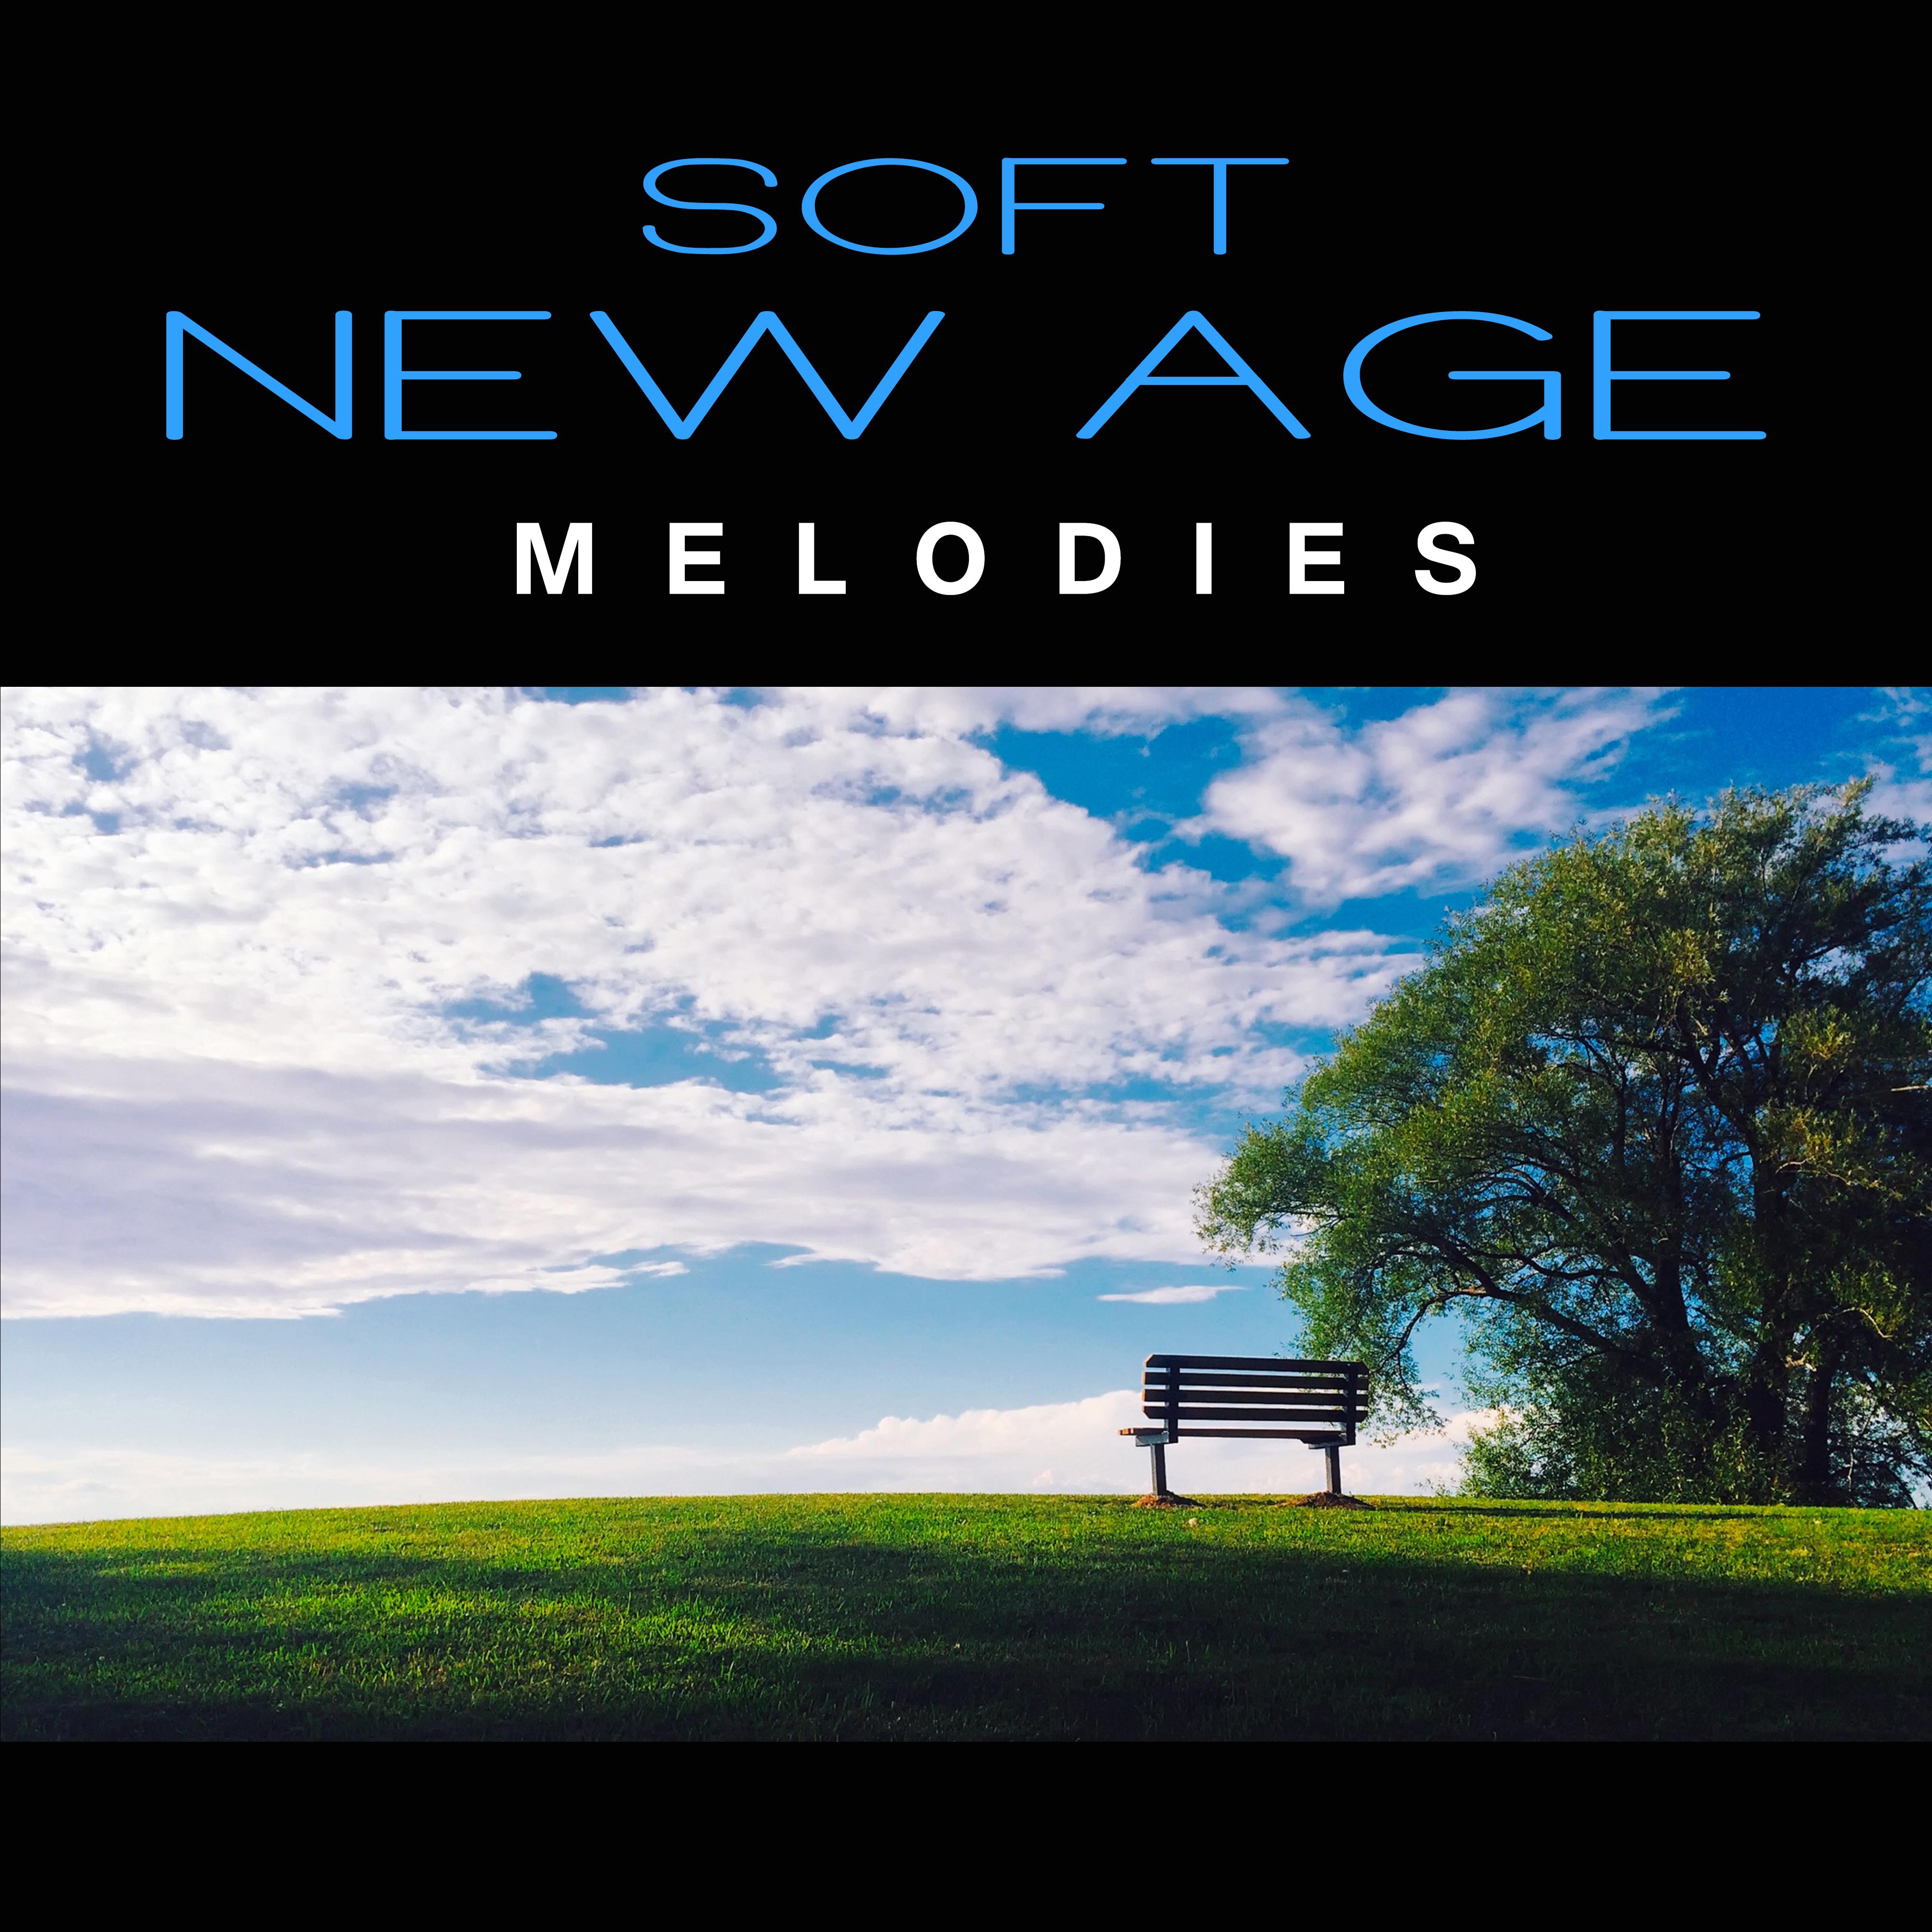 Soft New Age Melodies  Calm Down  Relax, Time to Rest, Healing New Age Sounds, Spirit Free